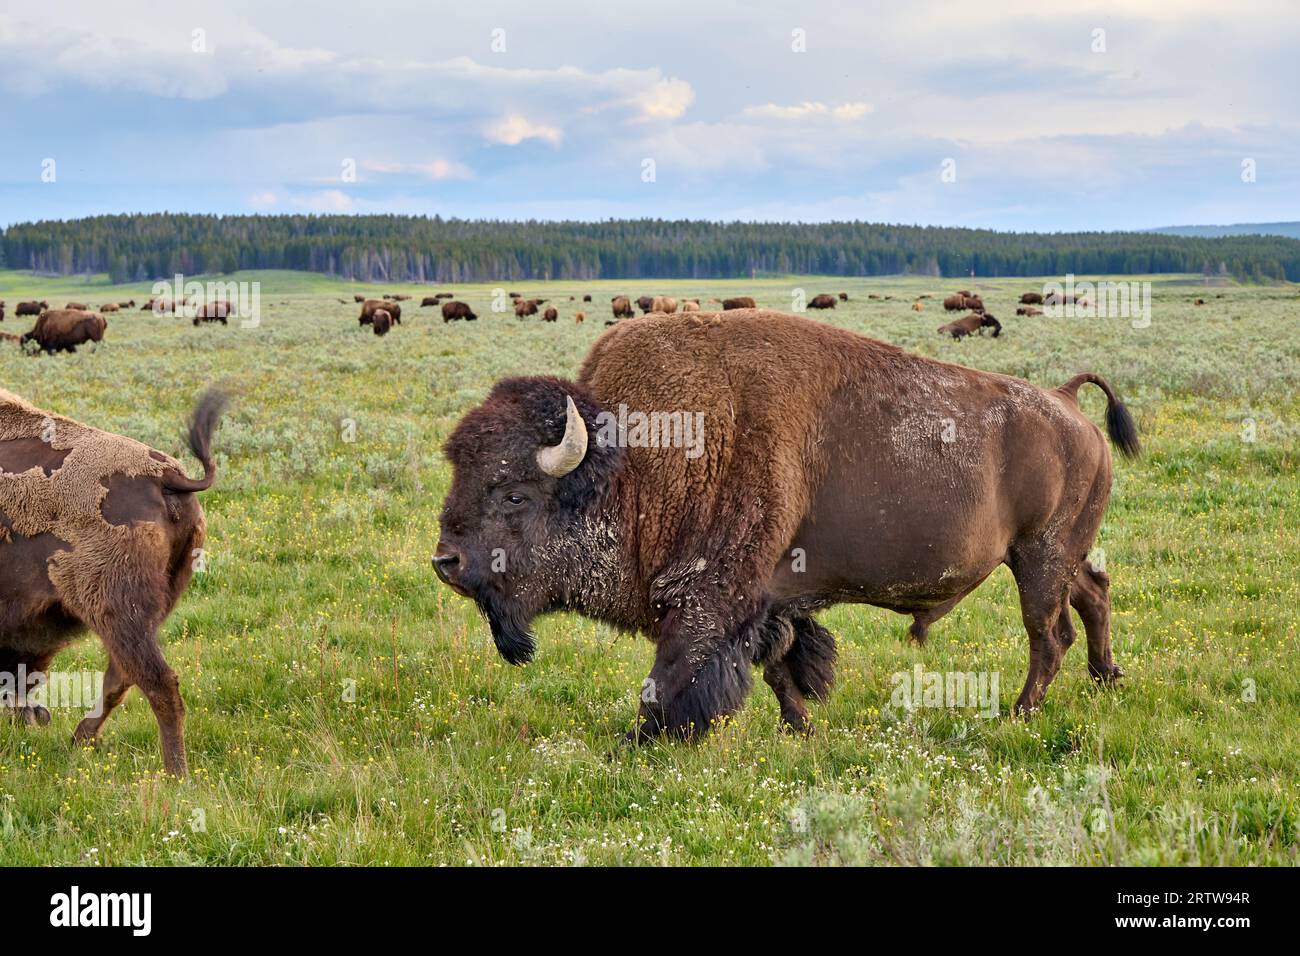 American bison (Bison bison), Yellowstone National Park, Wyoming, United States of America Stock Photo